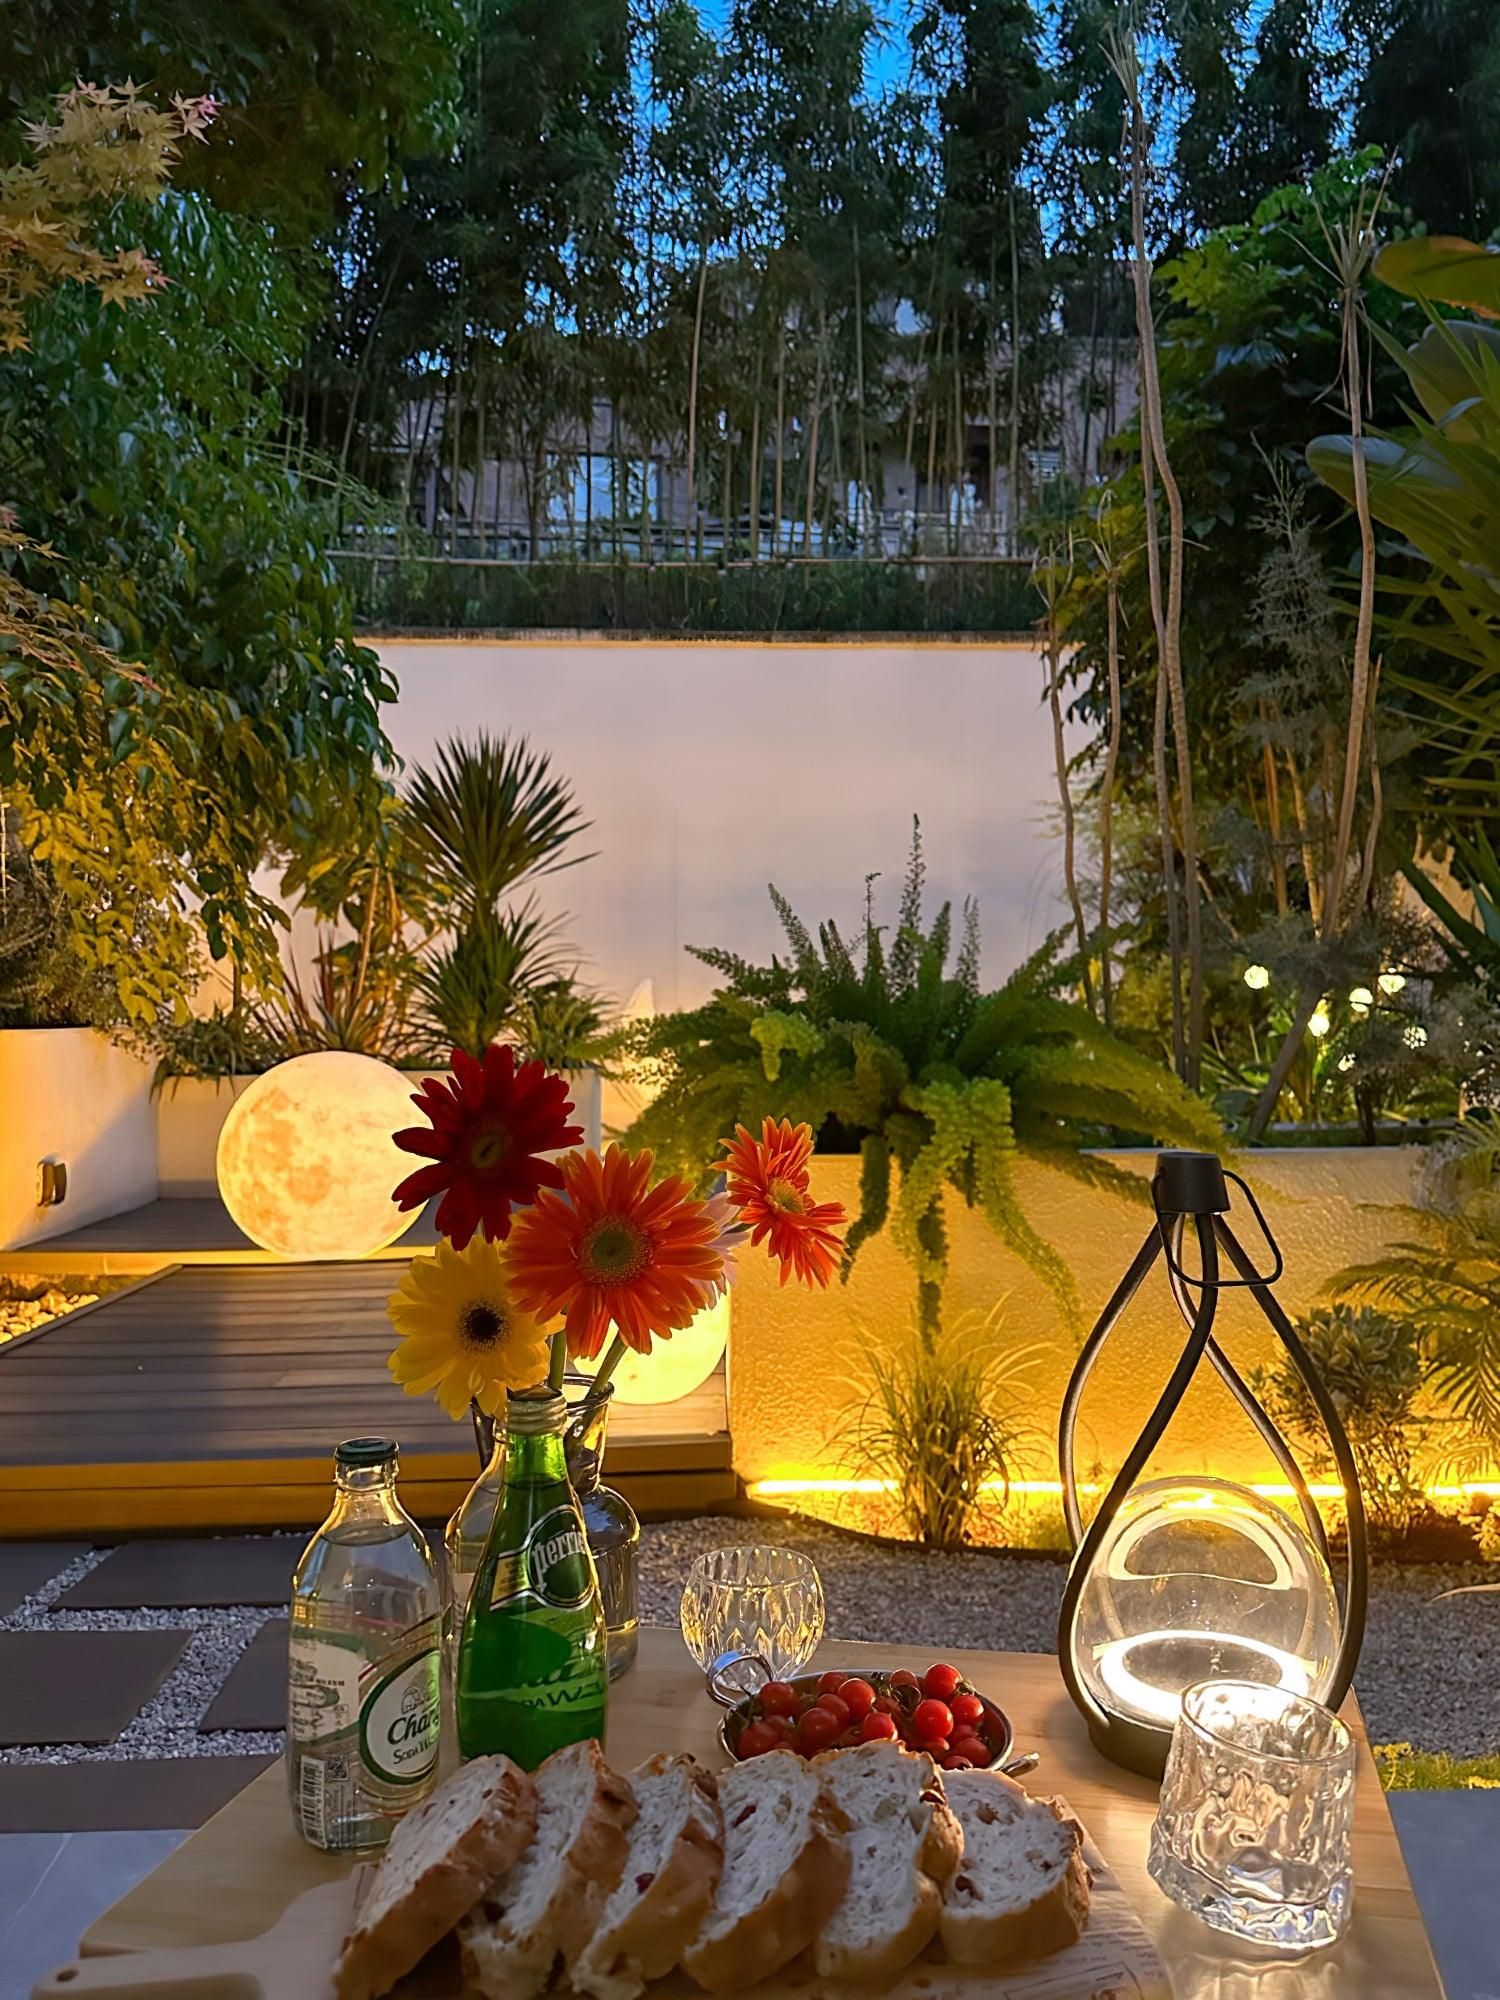 Tips for Decorative Patio Lanterns for a Festive Outdoor Ambiance